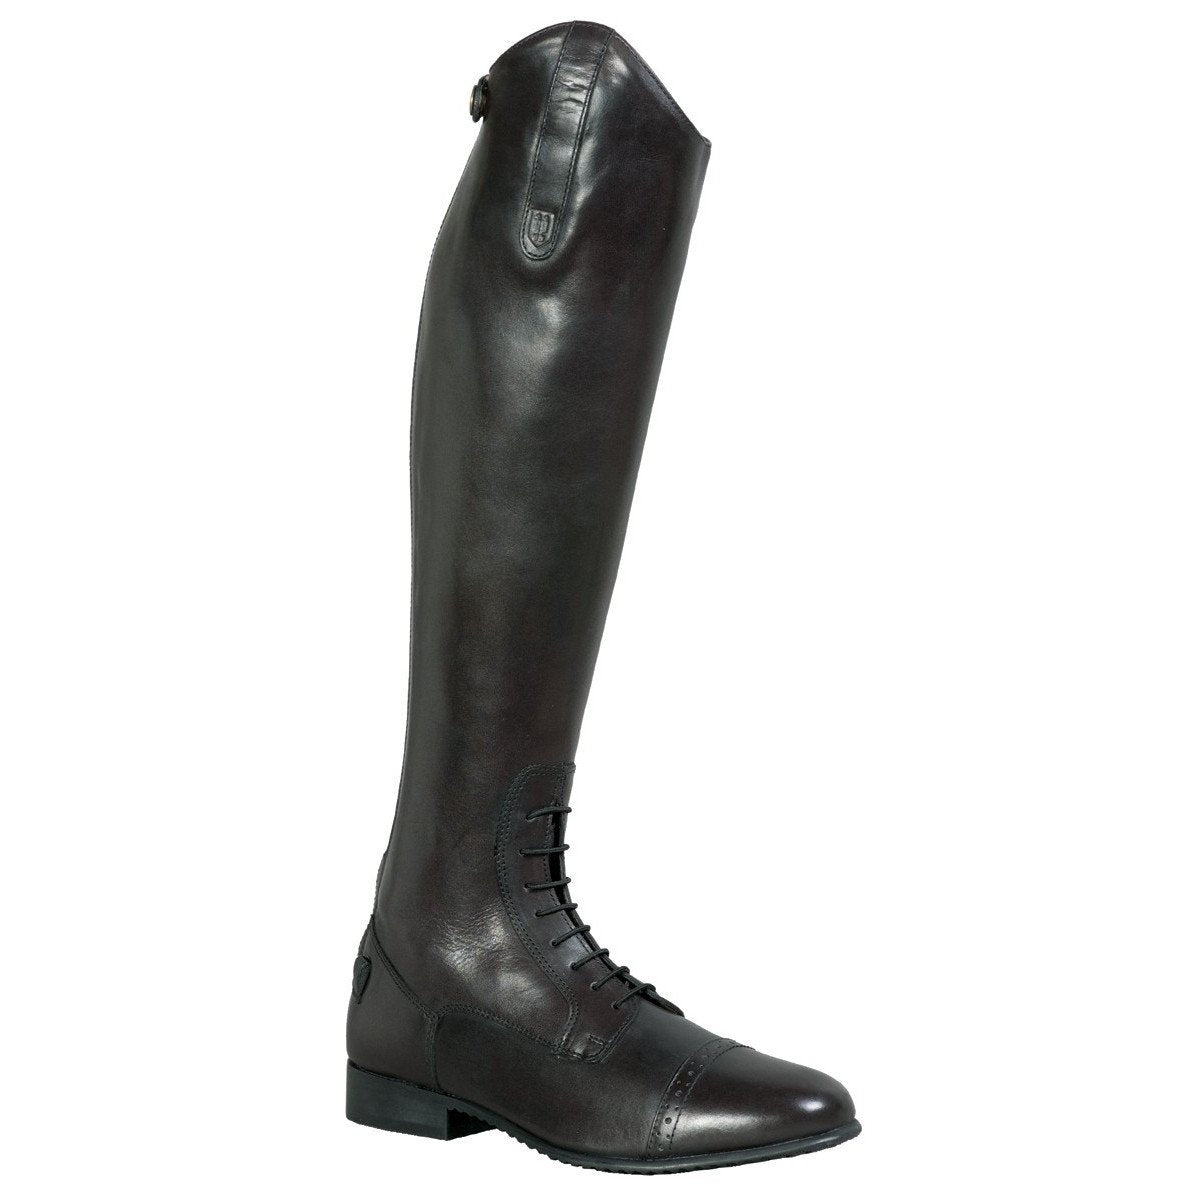 Treadstone Tuscany Field Boots - Tall Boots from Baker's Saddlery